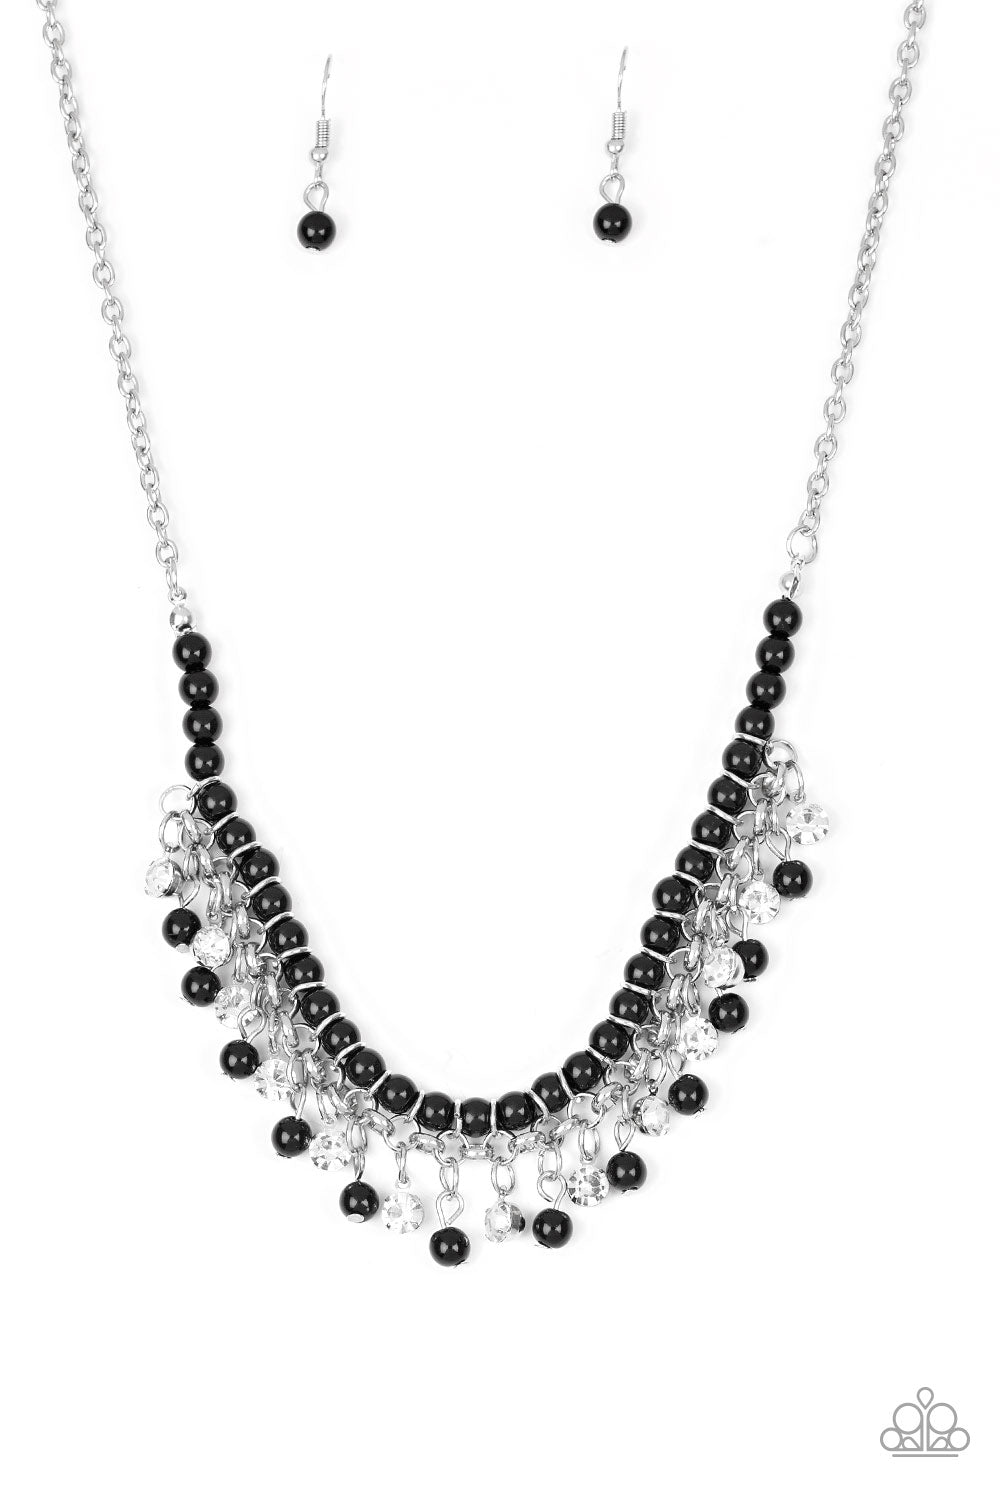 A Touch of CLASSY - Black Necklace Set